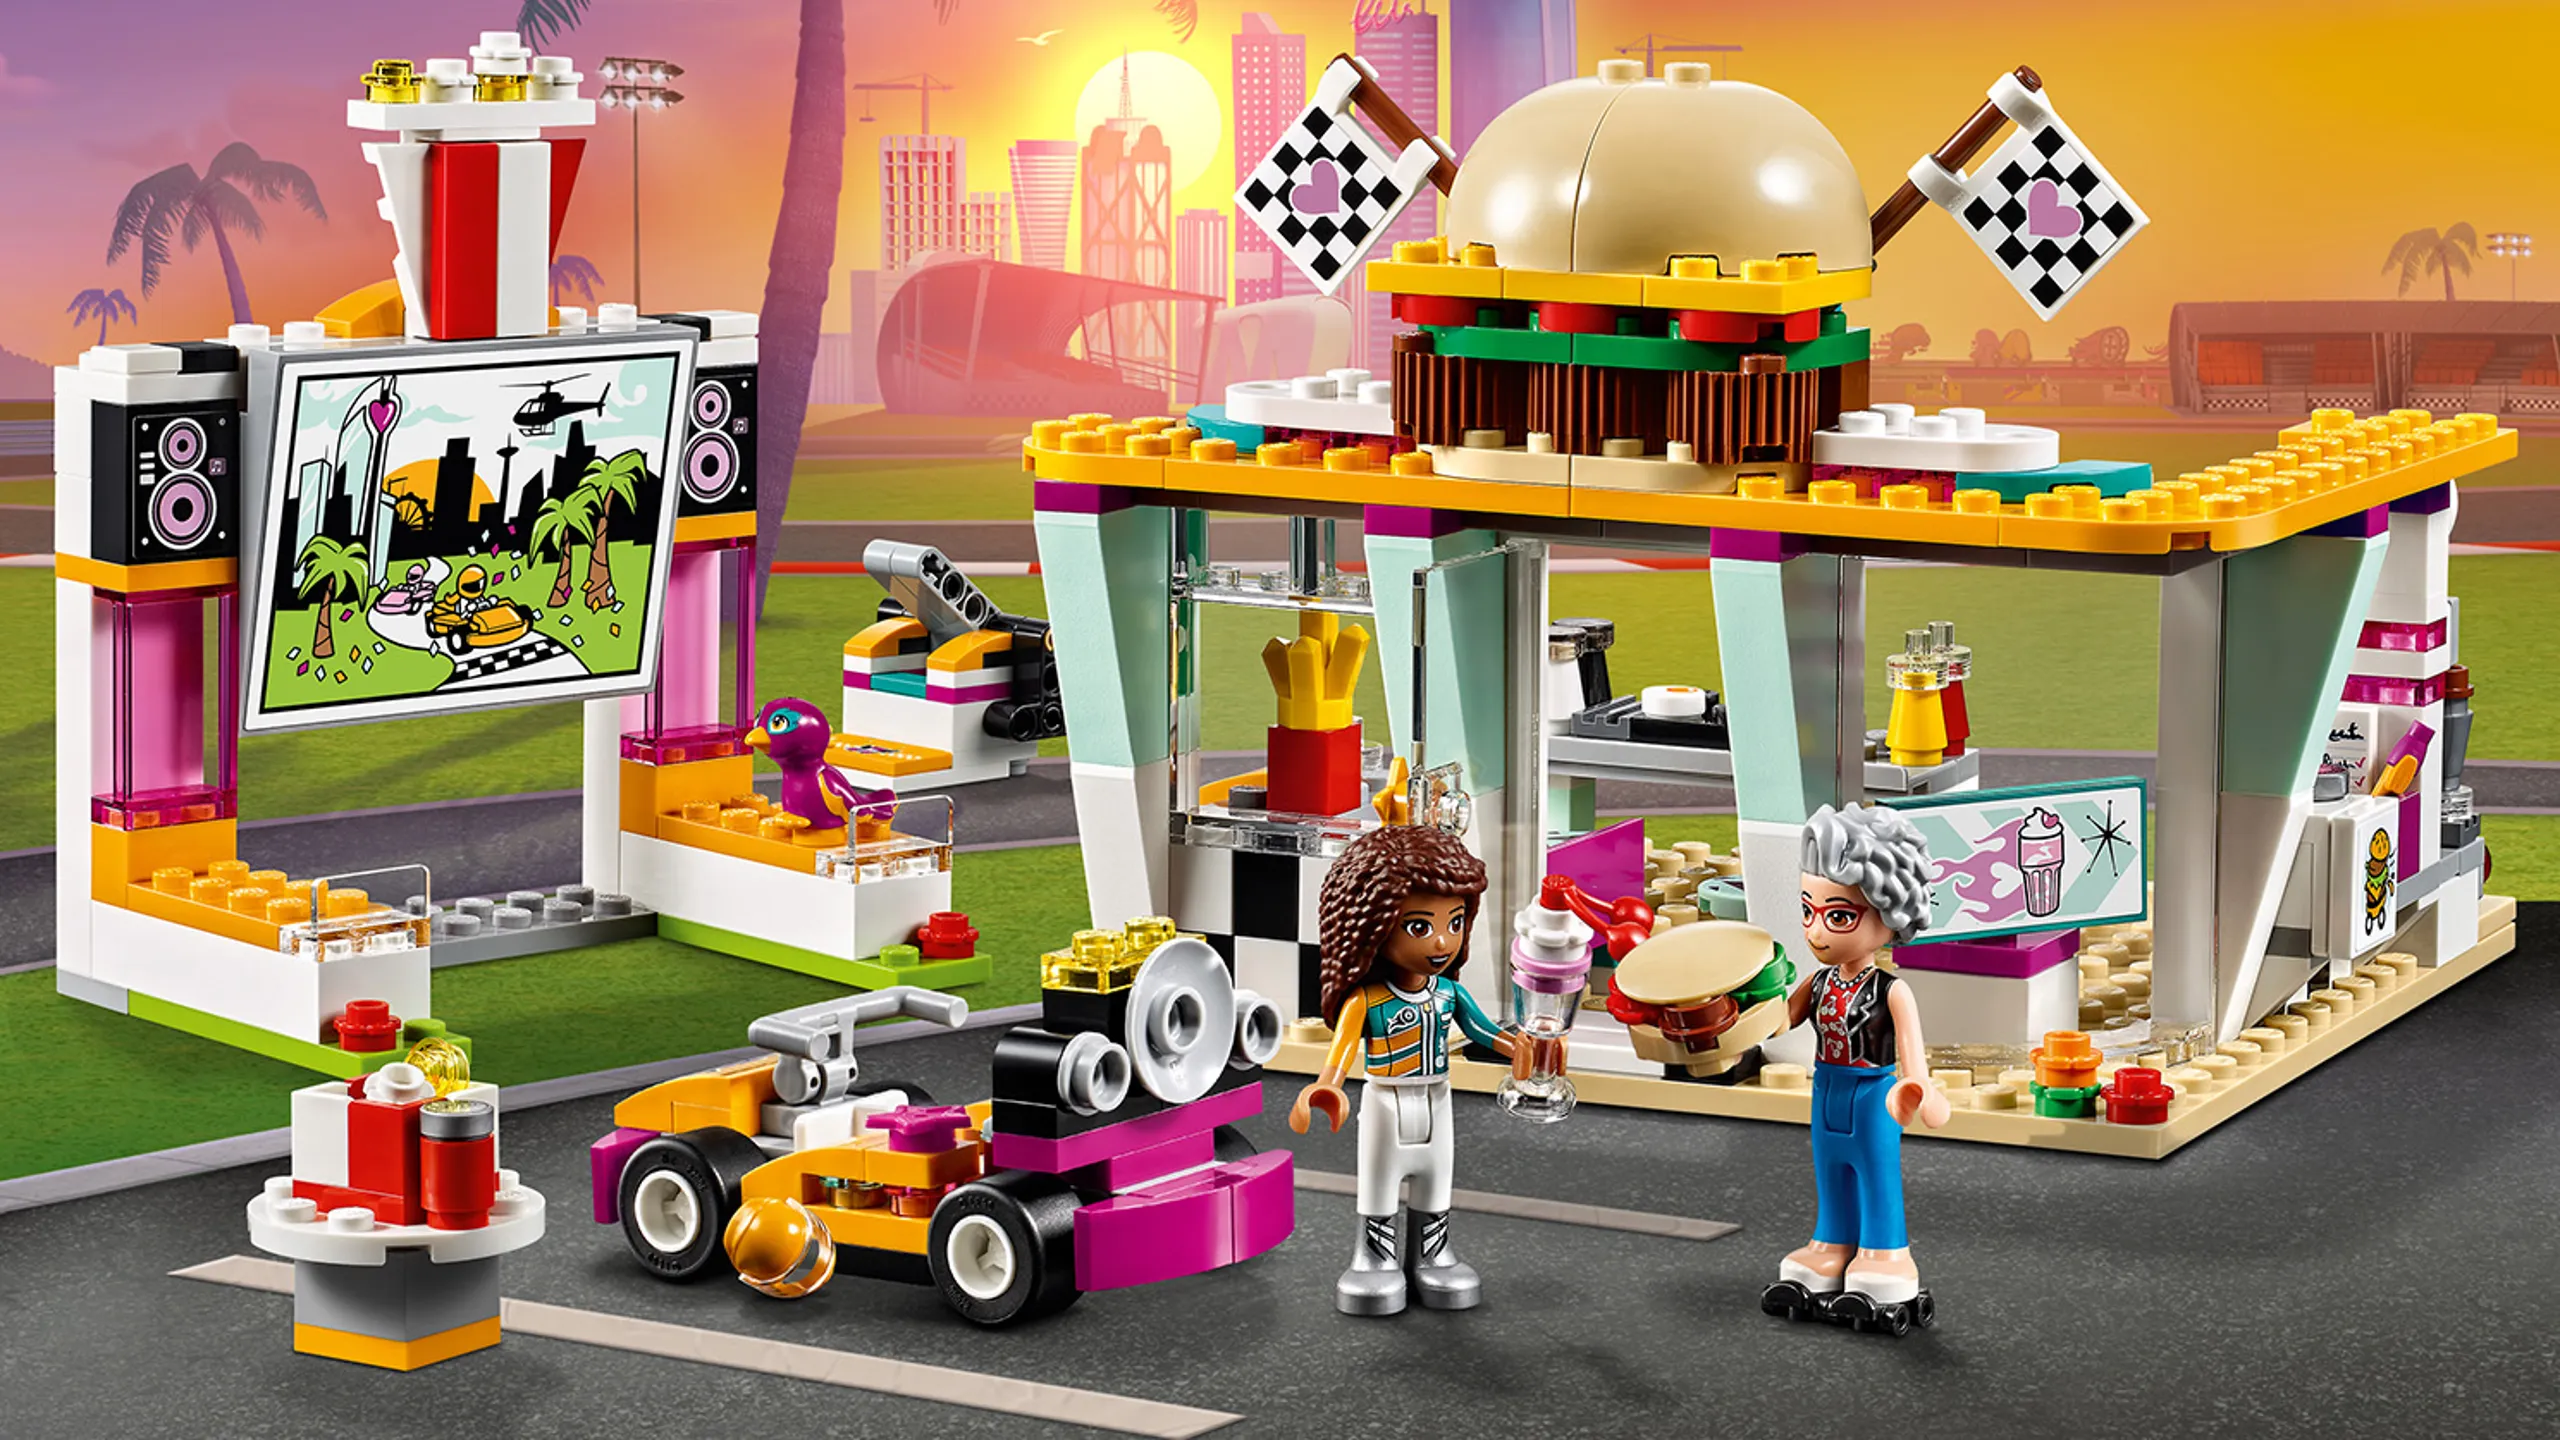 LEGO Friends - 41349 Drifting Diner - Andrea watches a movie at the drive in cinema and gets snacks from Dottie's Diner that sells drinks, fries, burgers and popcorn.